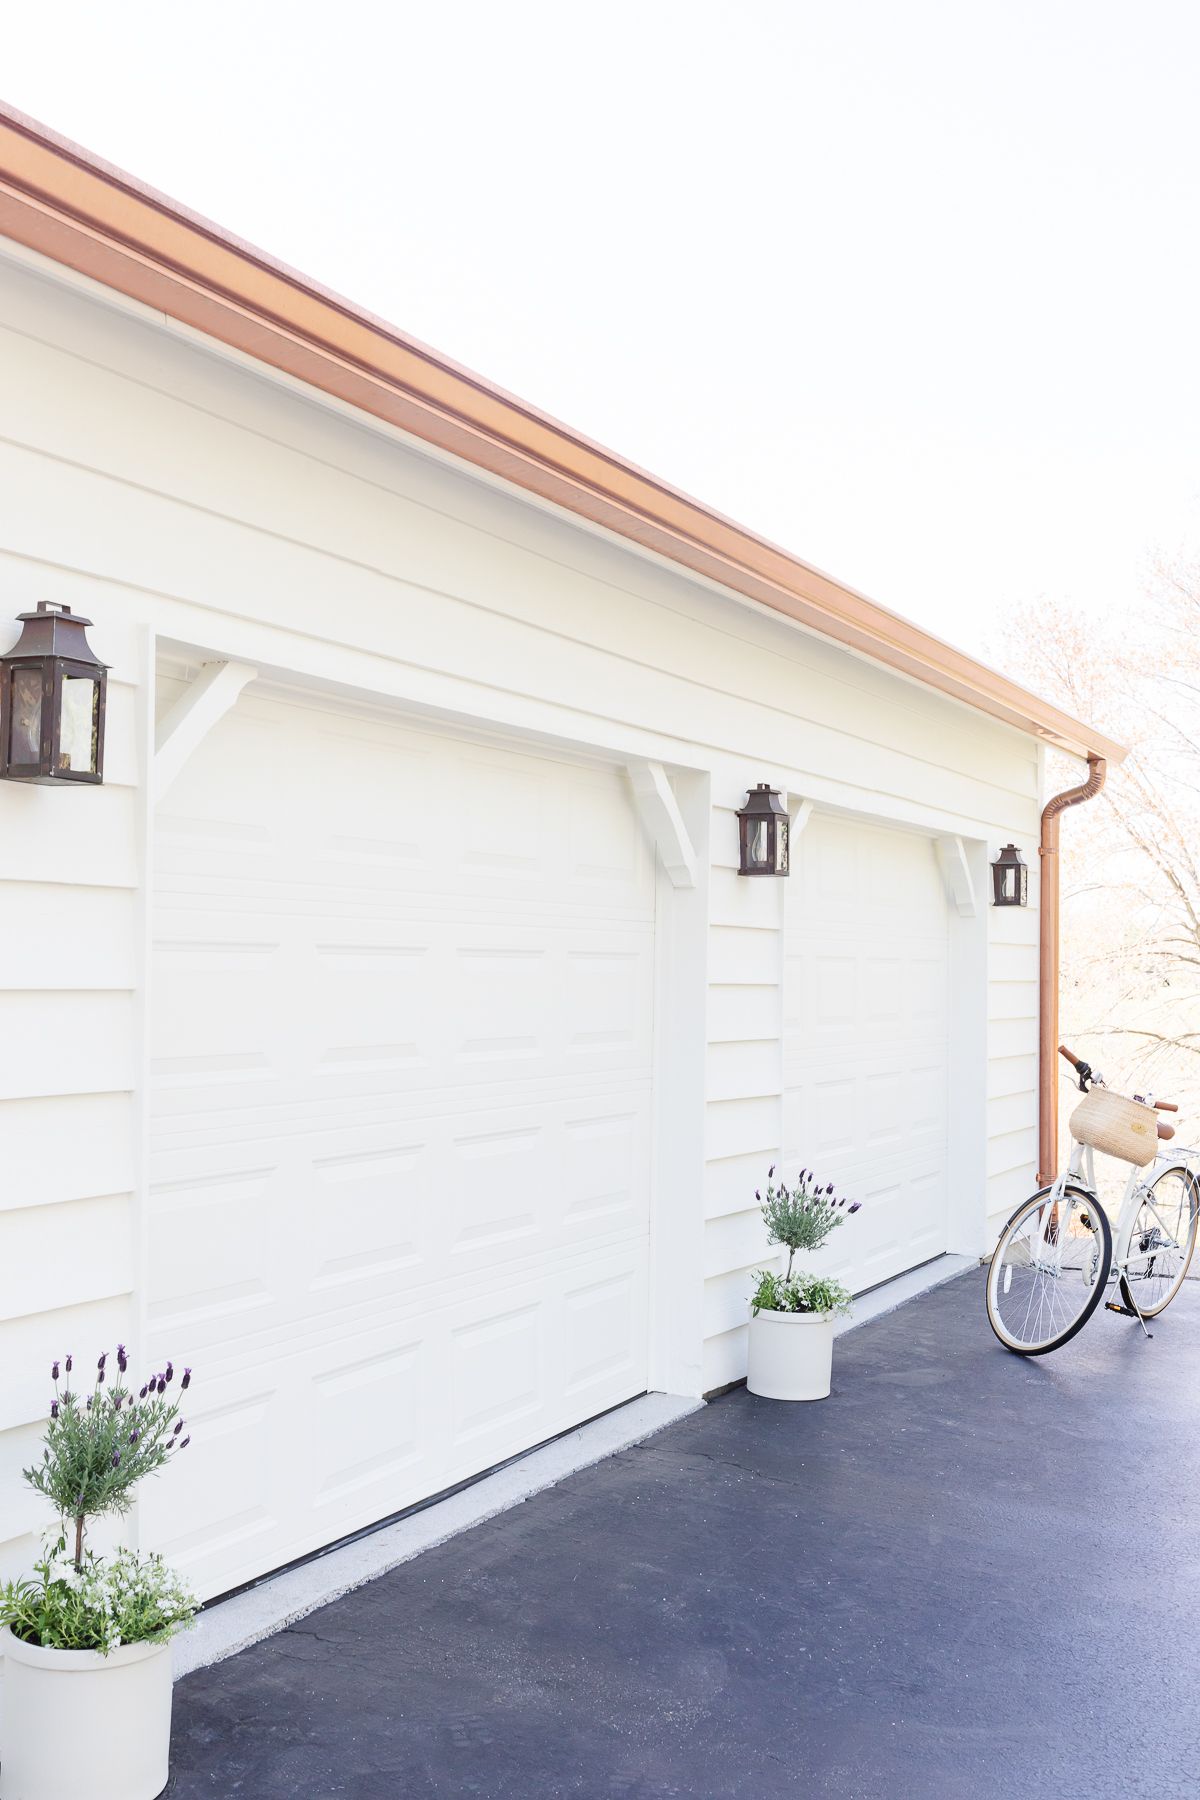 Garage doors of a home, painted in a soft cream color, with copper gutters and copper lanterns.